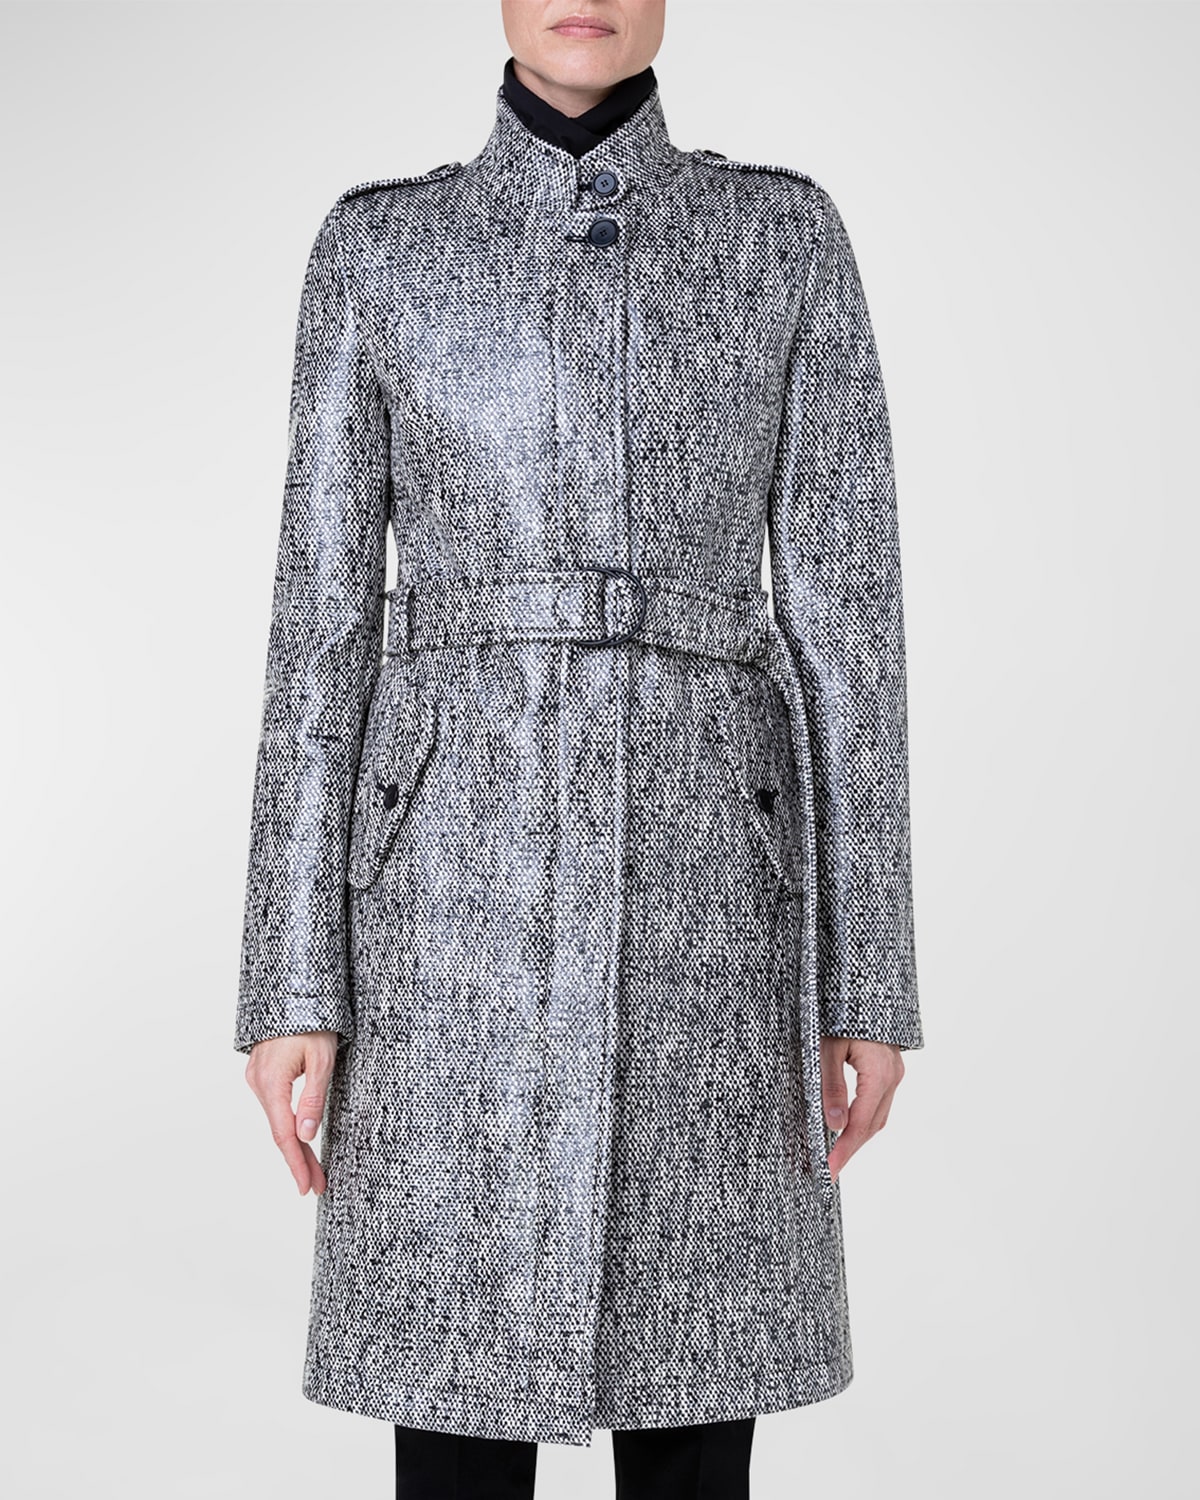 AKRIS PUNTO LACQUERED TWEED TOP COAT WITH REMOVABLE QUILT INSERT